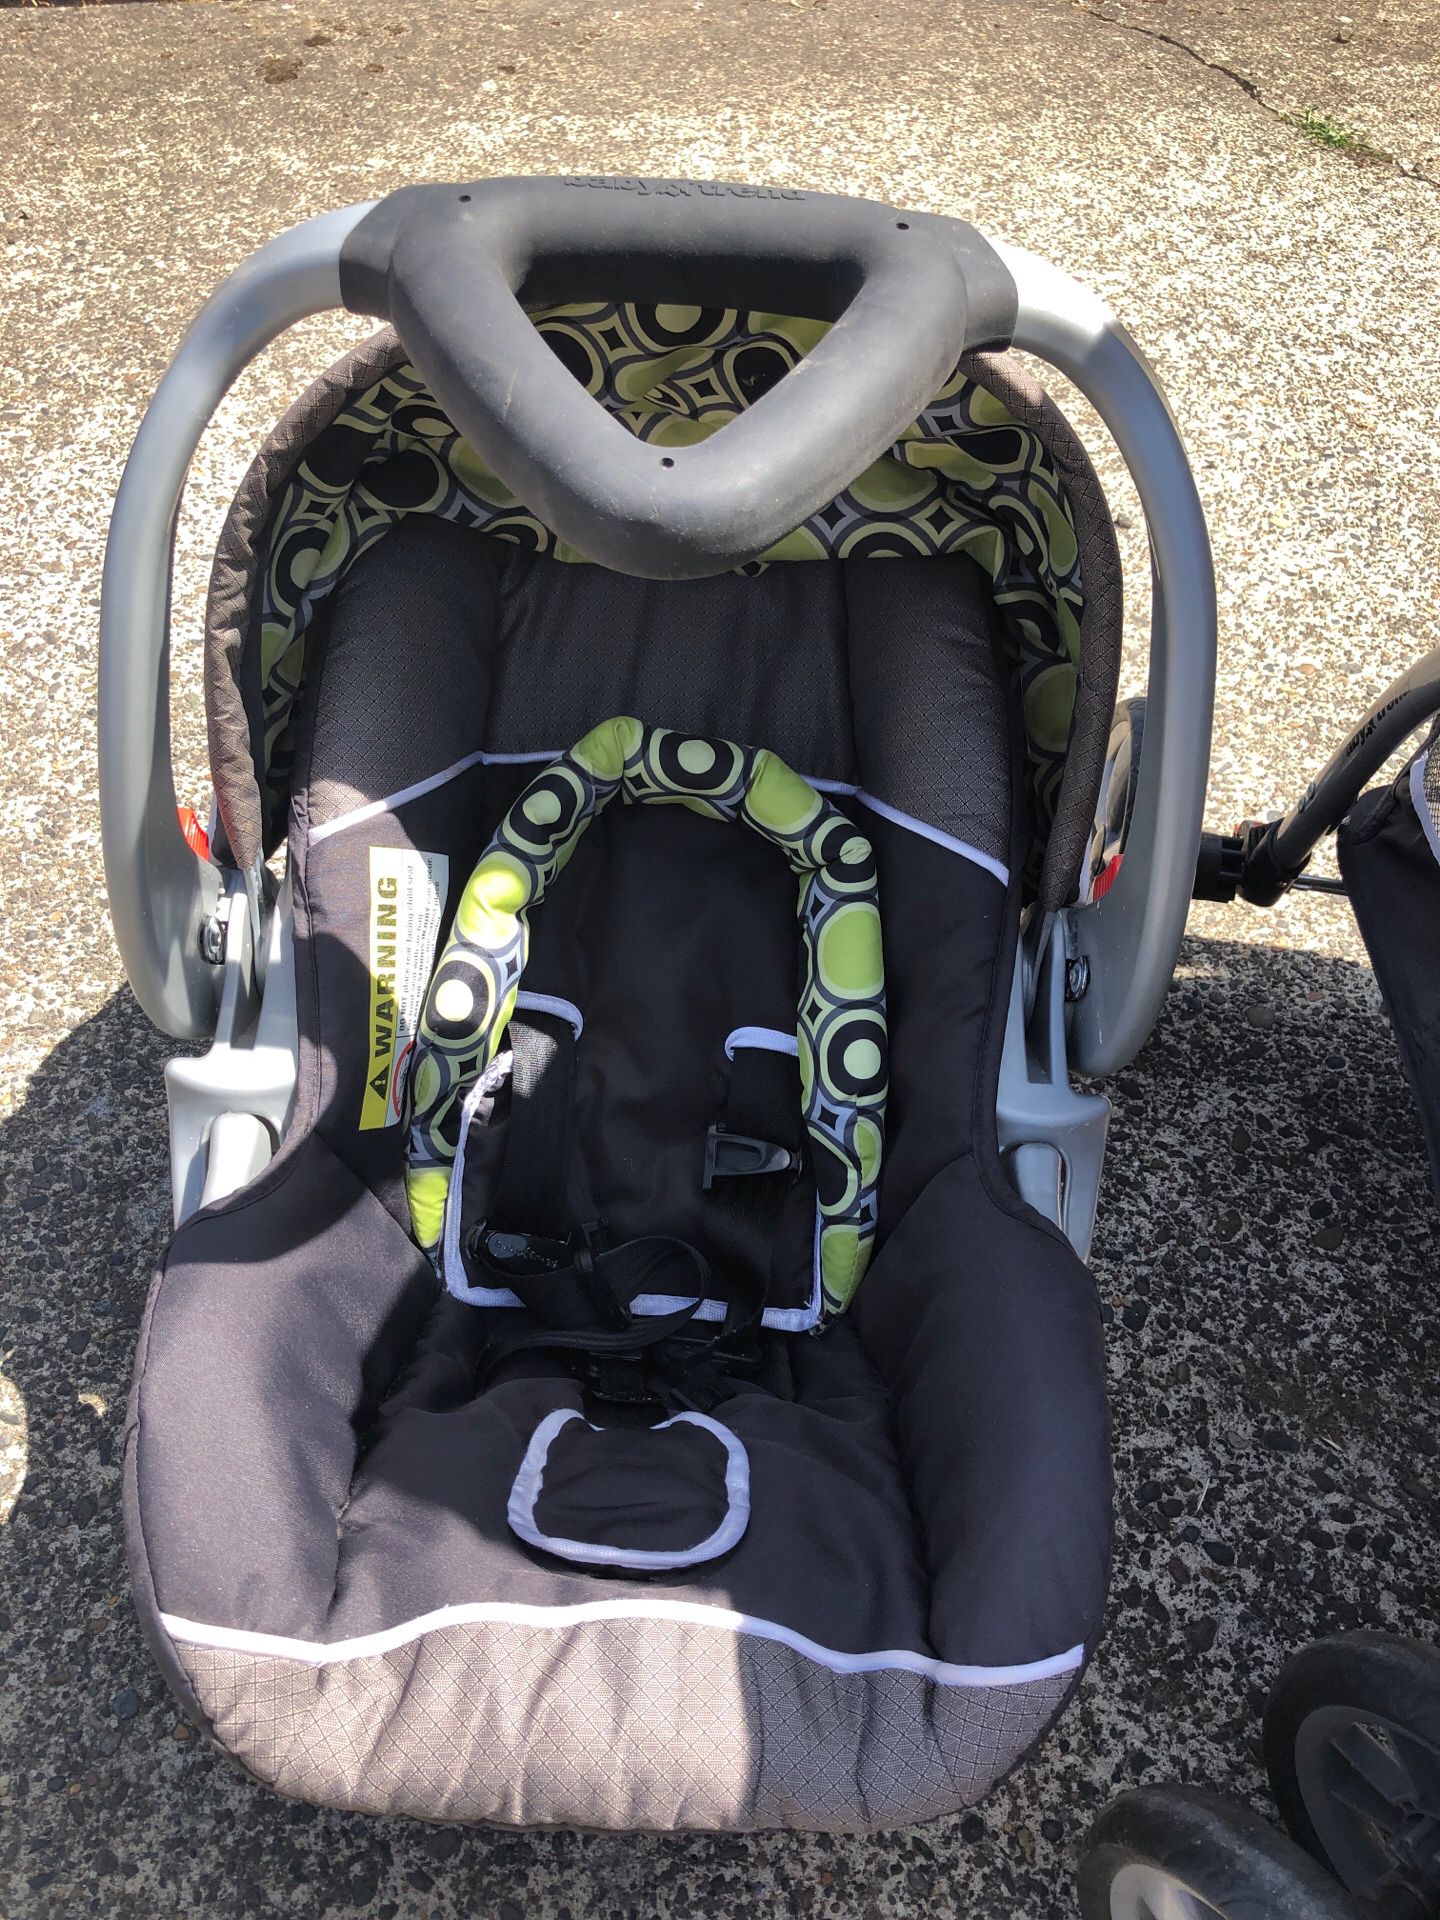 Baby Trend infant seat, stroller, and bases